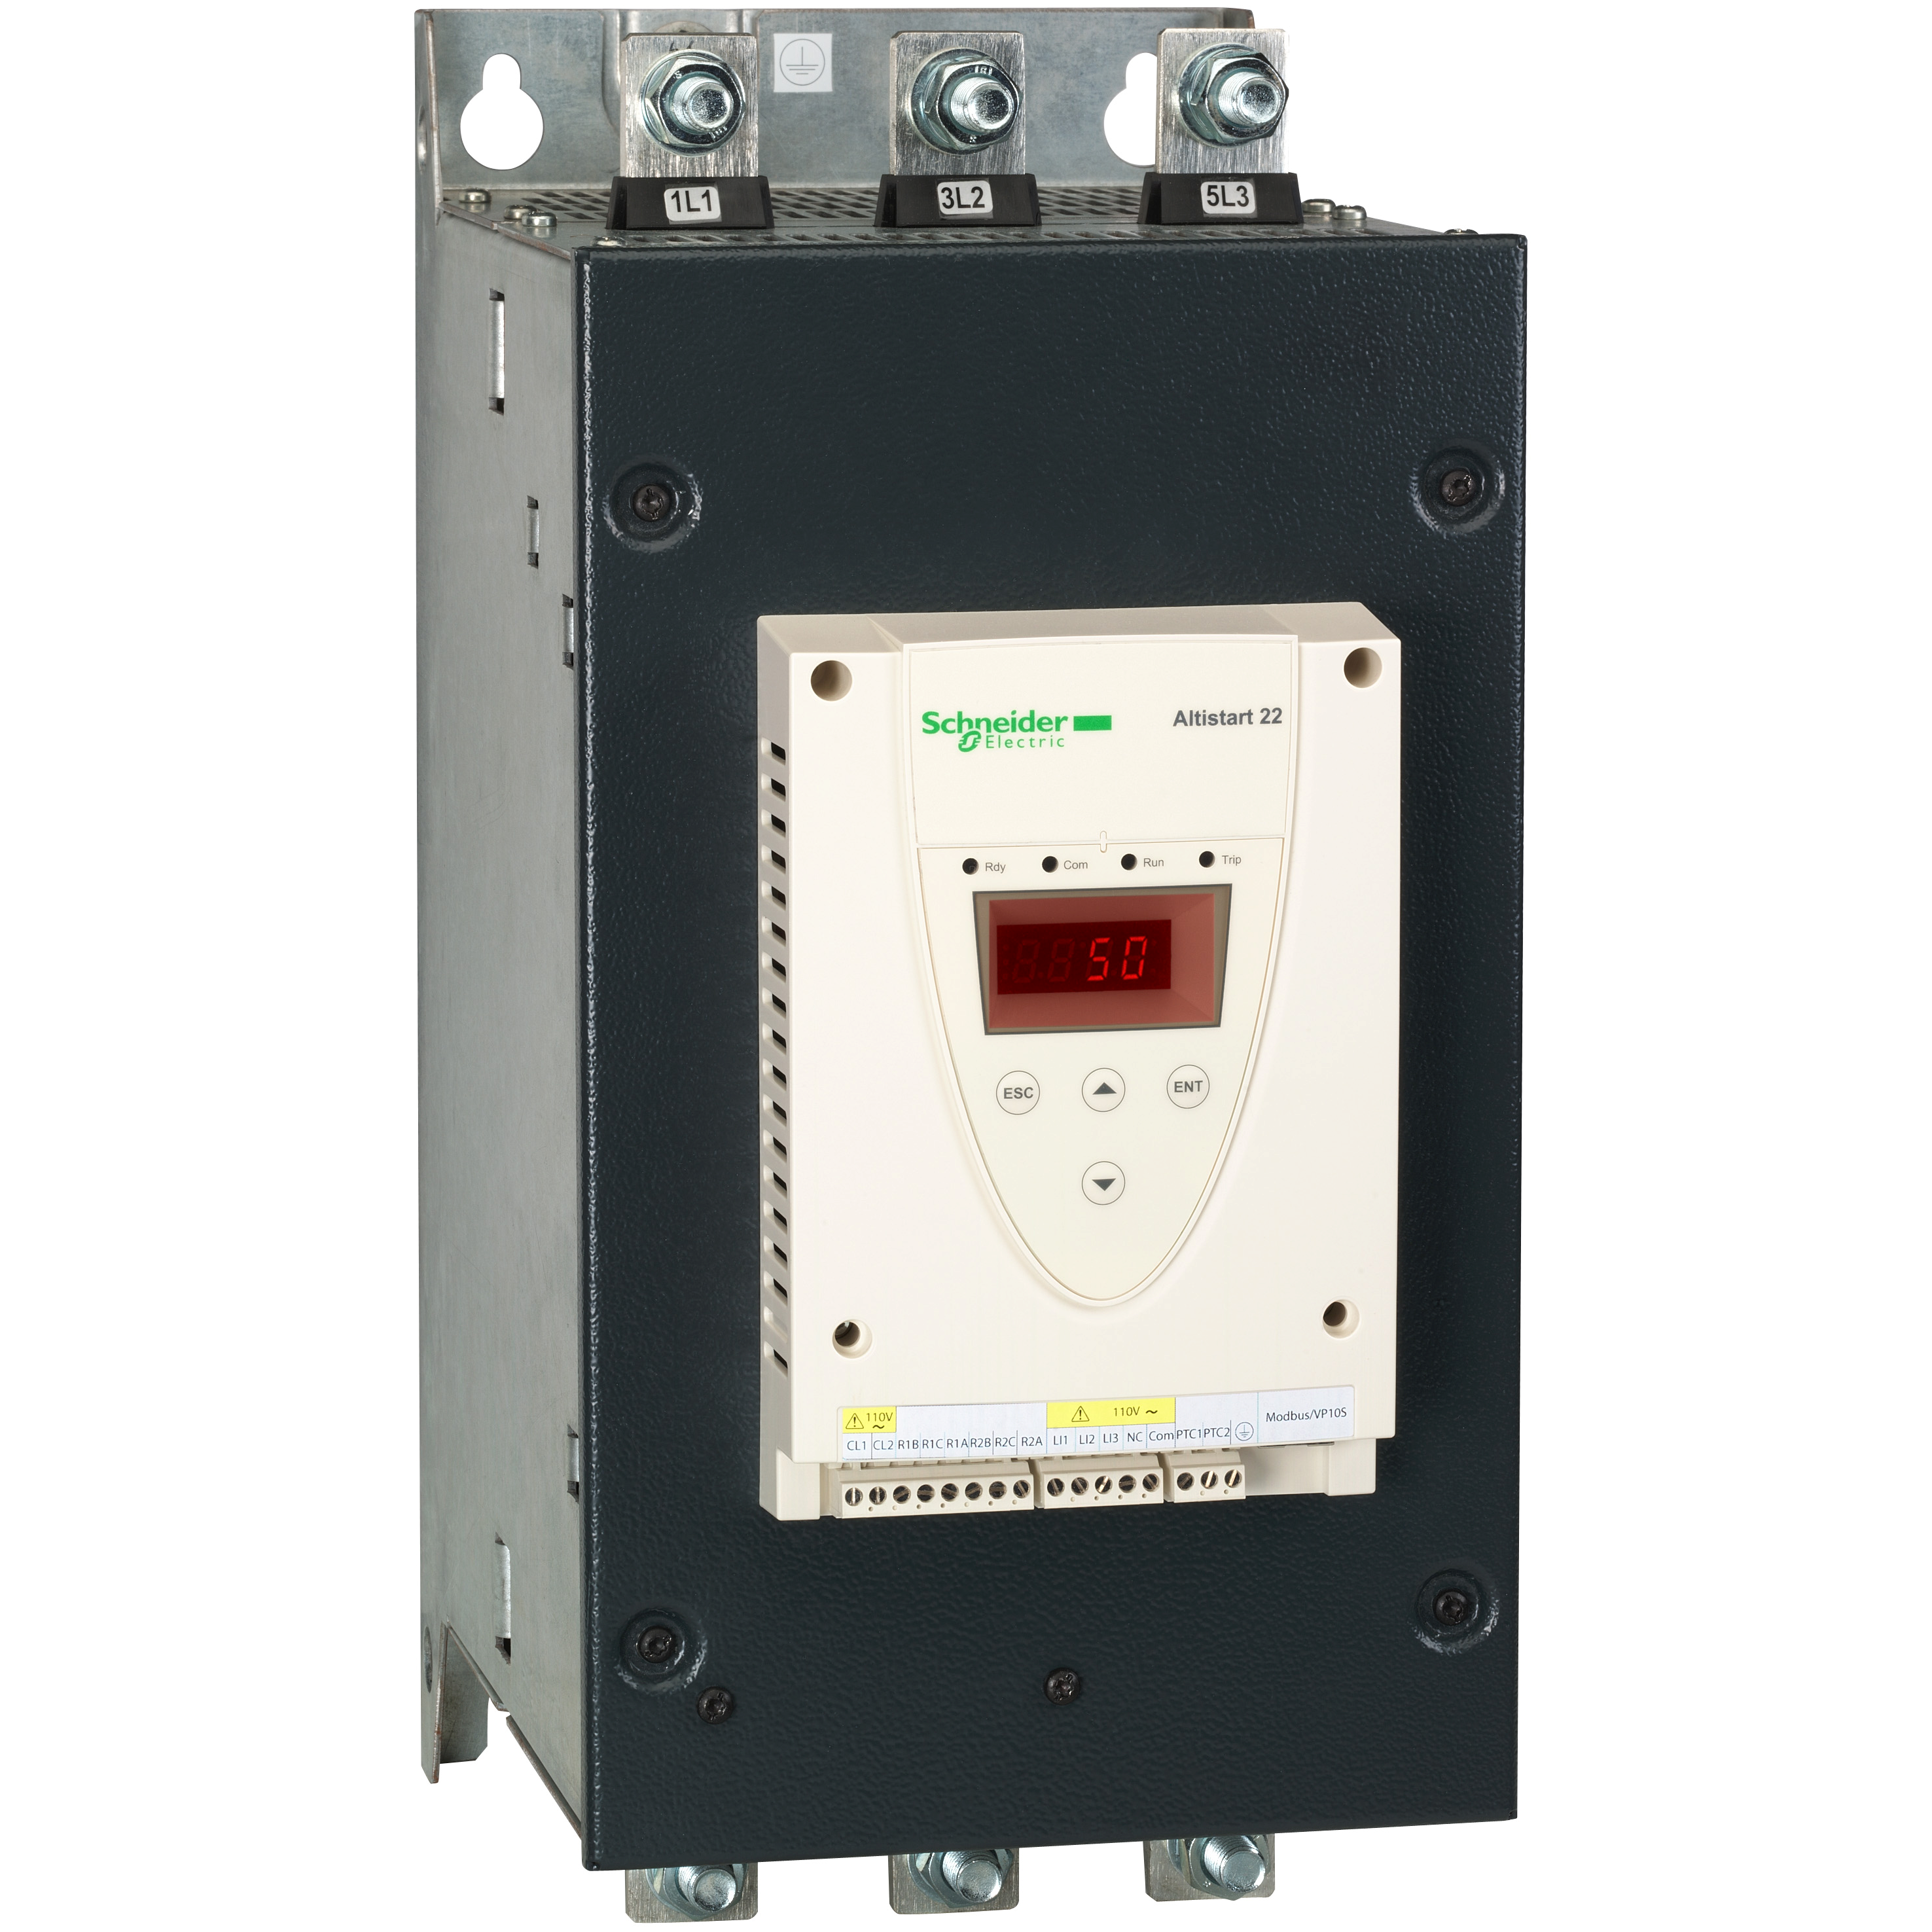 Soft start/soft stop, P=132kW, Uc=400V AC, In=250A